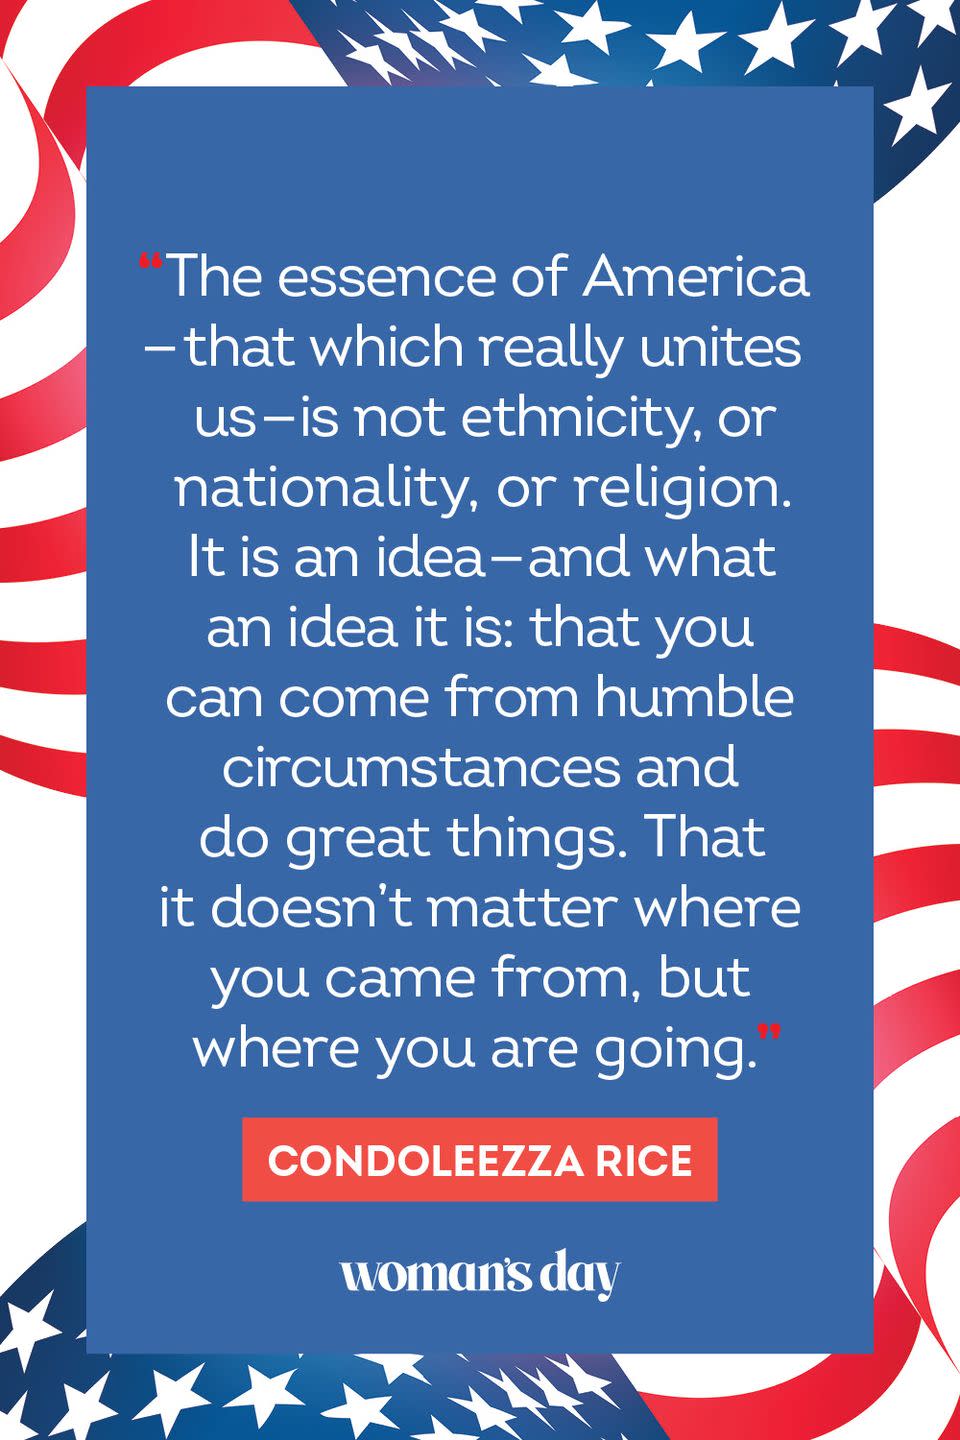 <p>"The essence of America — that which really unites us — is not ethnicity, or nationality, or religion. It is an idea — and what an idea it is: that you can come from humble circumstances and do great things. That it doesn't matter where you come from, but where you are going." </p>